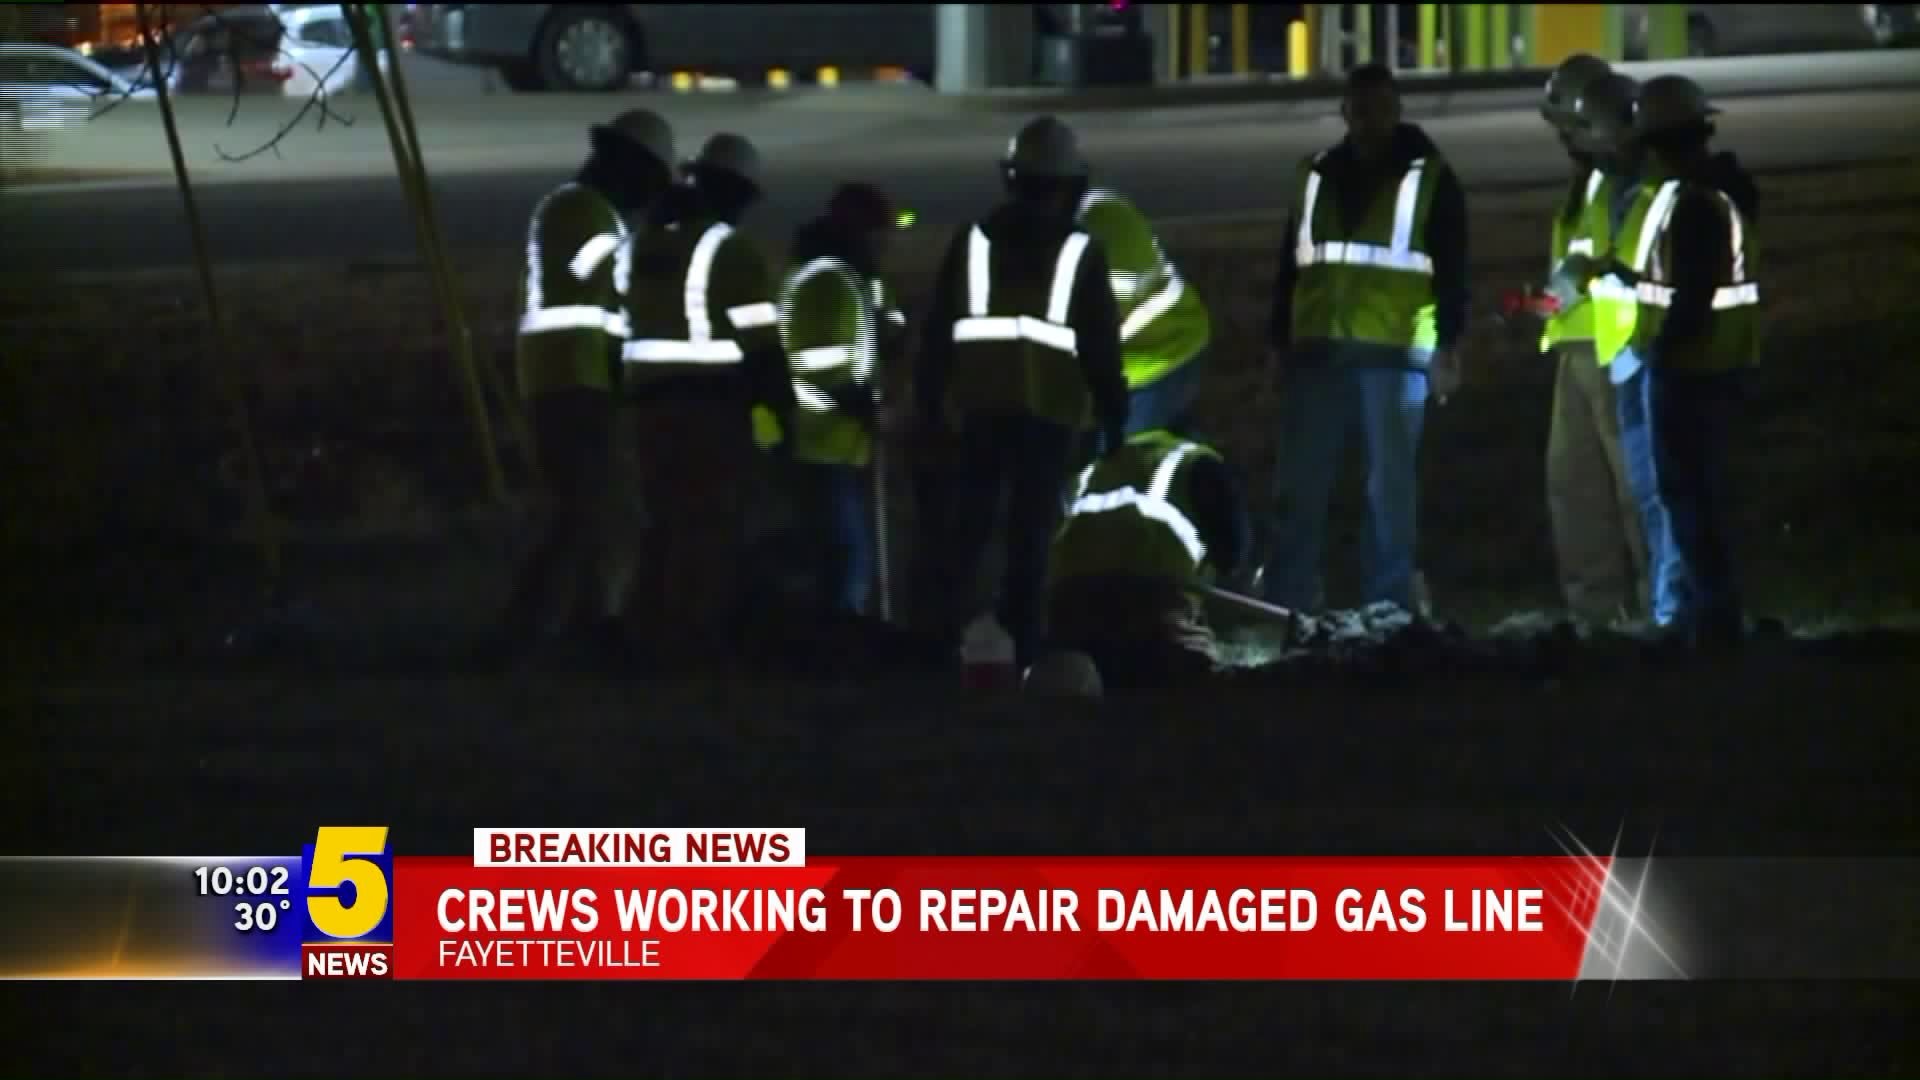 Crews Working To Repair Damaged Gas Line In Fayetteville